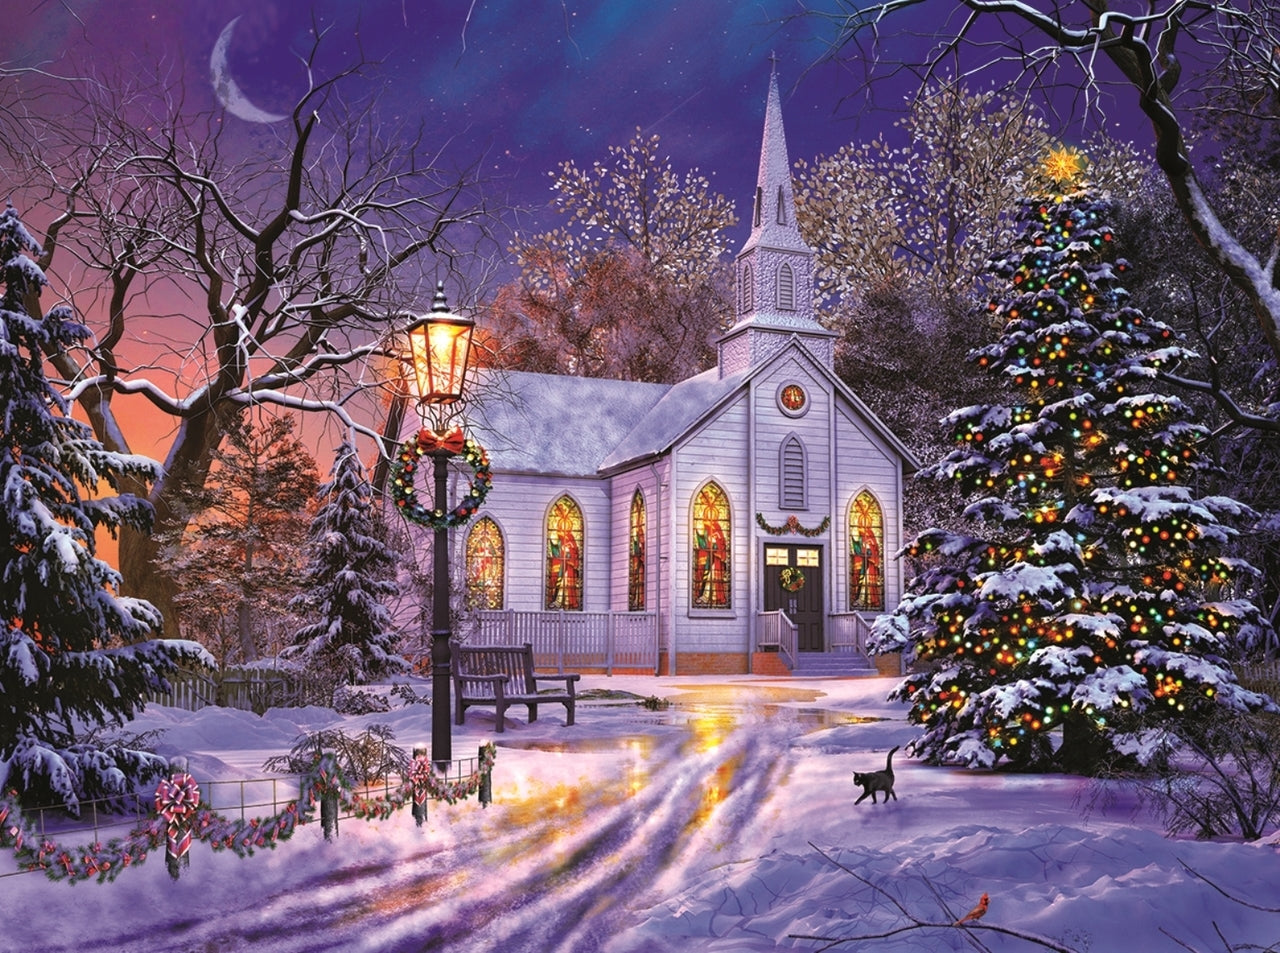 Sunsout - The Old Christmas Church - 1000 piece jigsaw puzzle